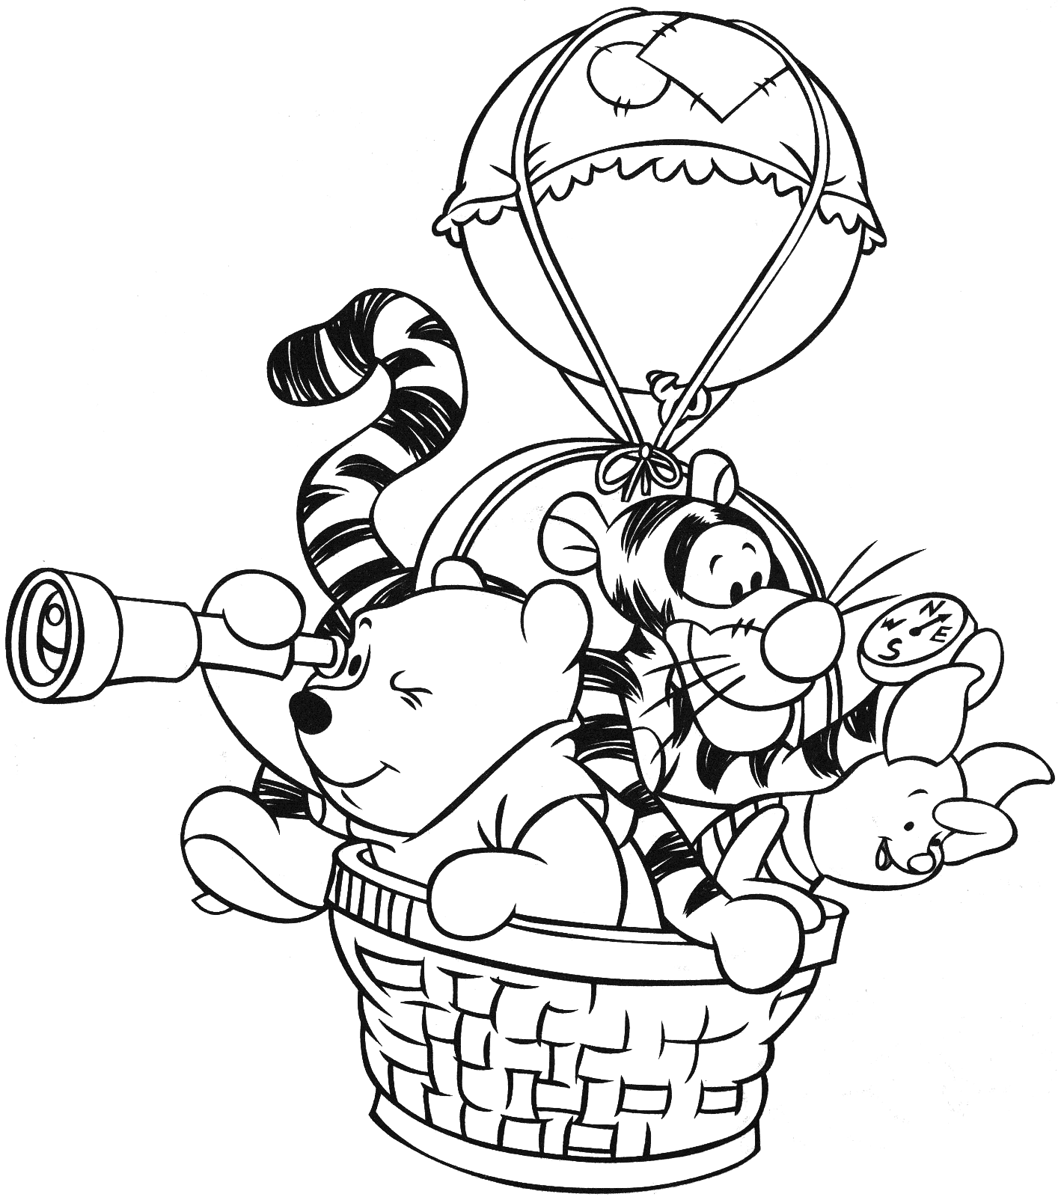 winnie the pooh coloring page Free Coloring Pages Printables for Kids